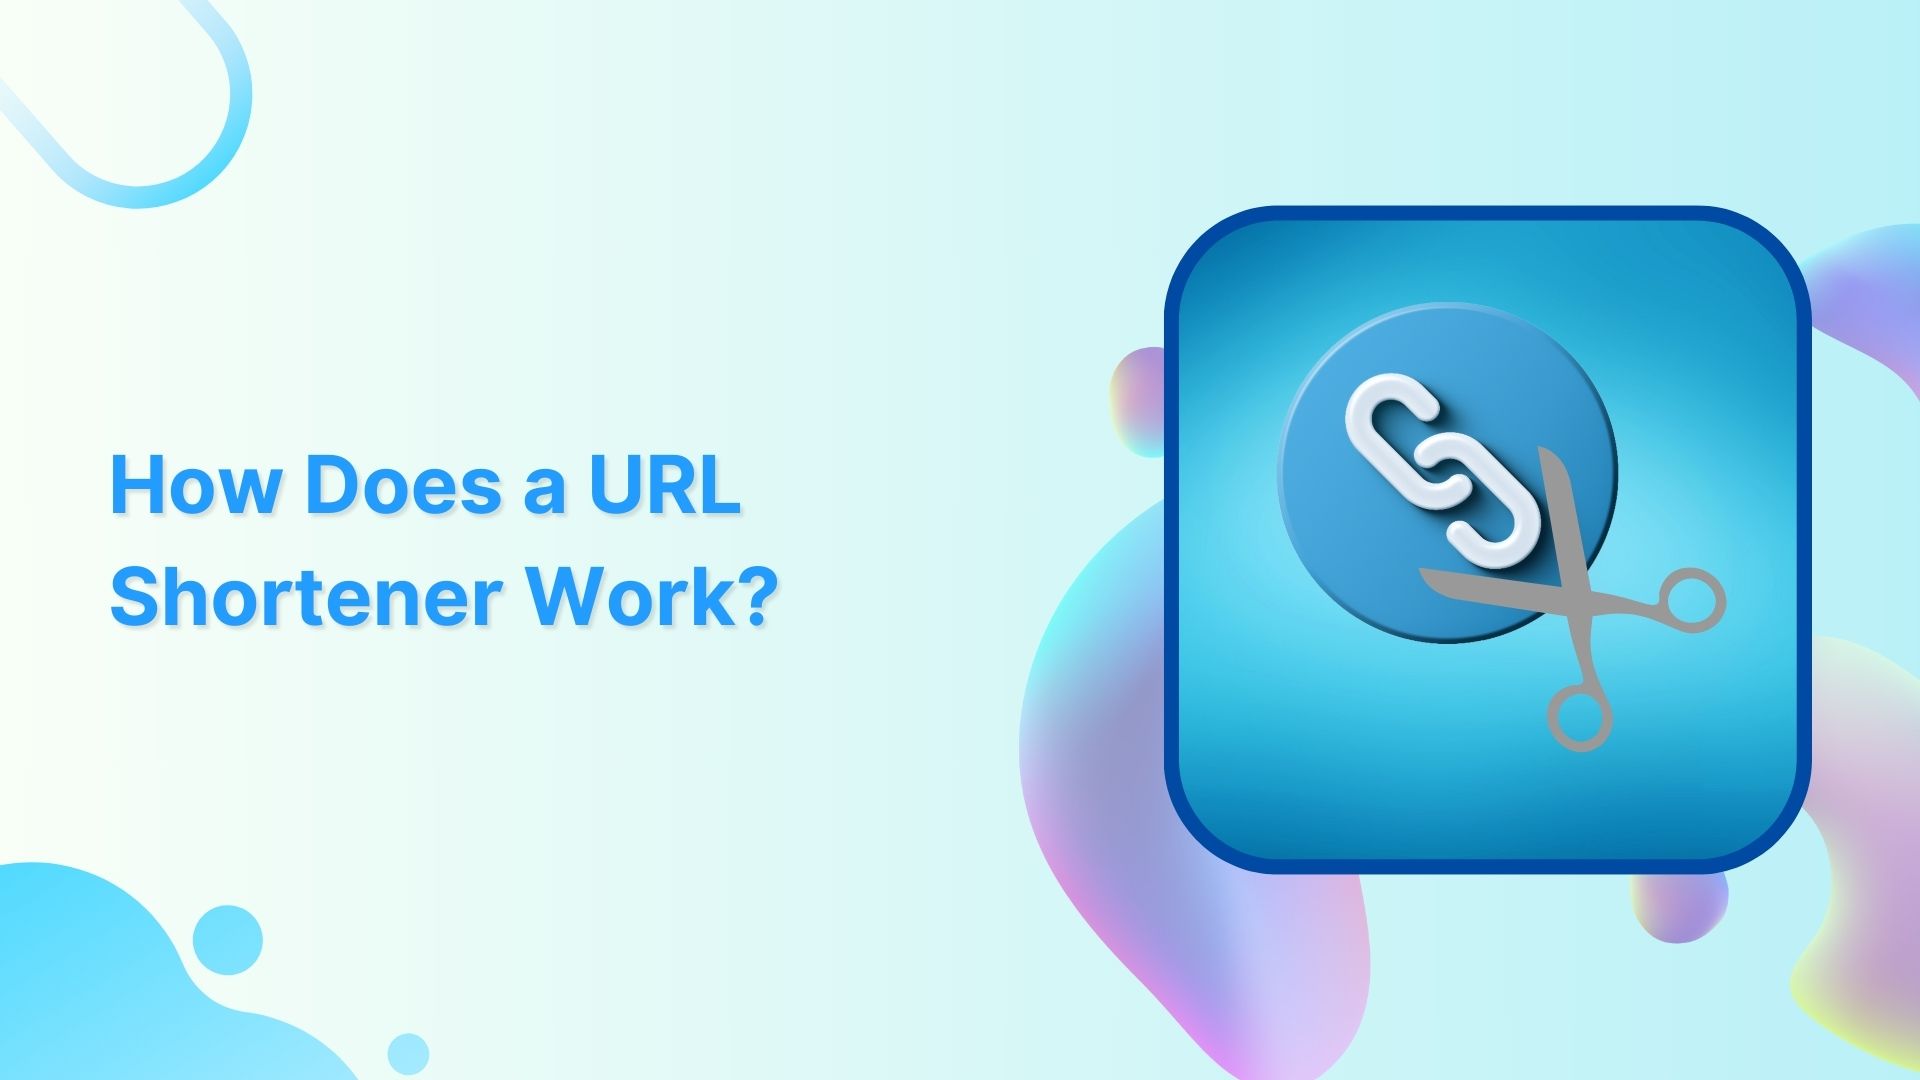 How URL Shortener Works: A Quick Guide